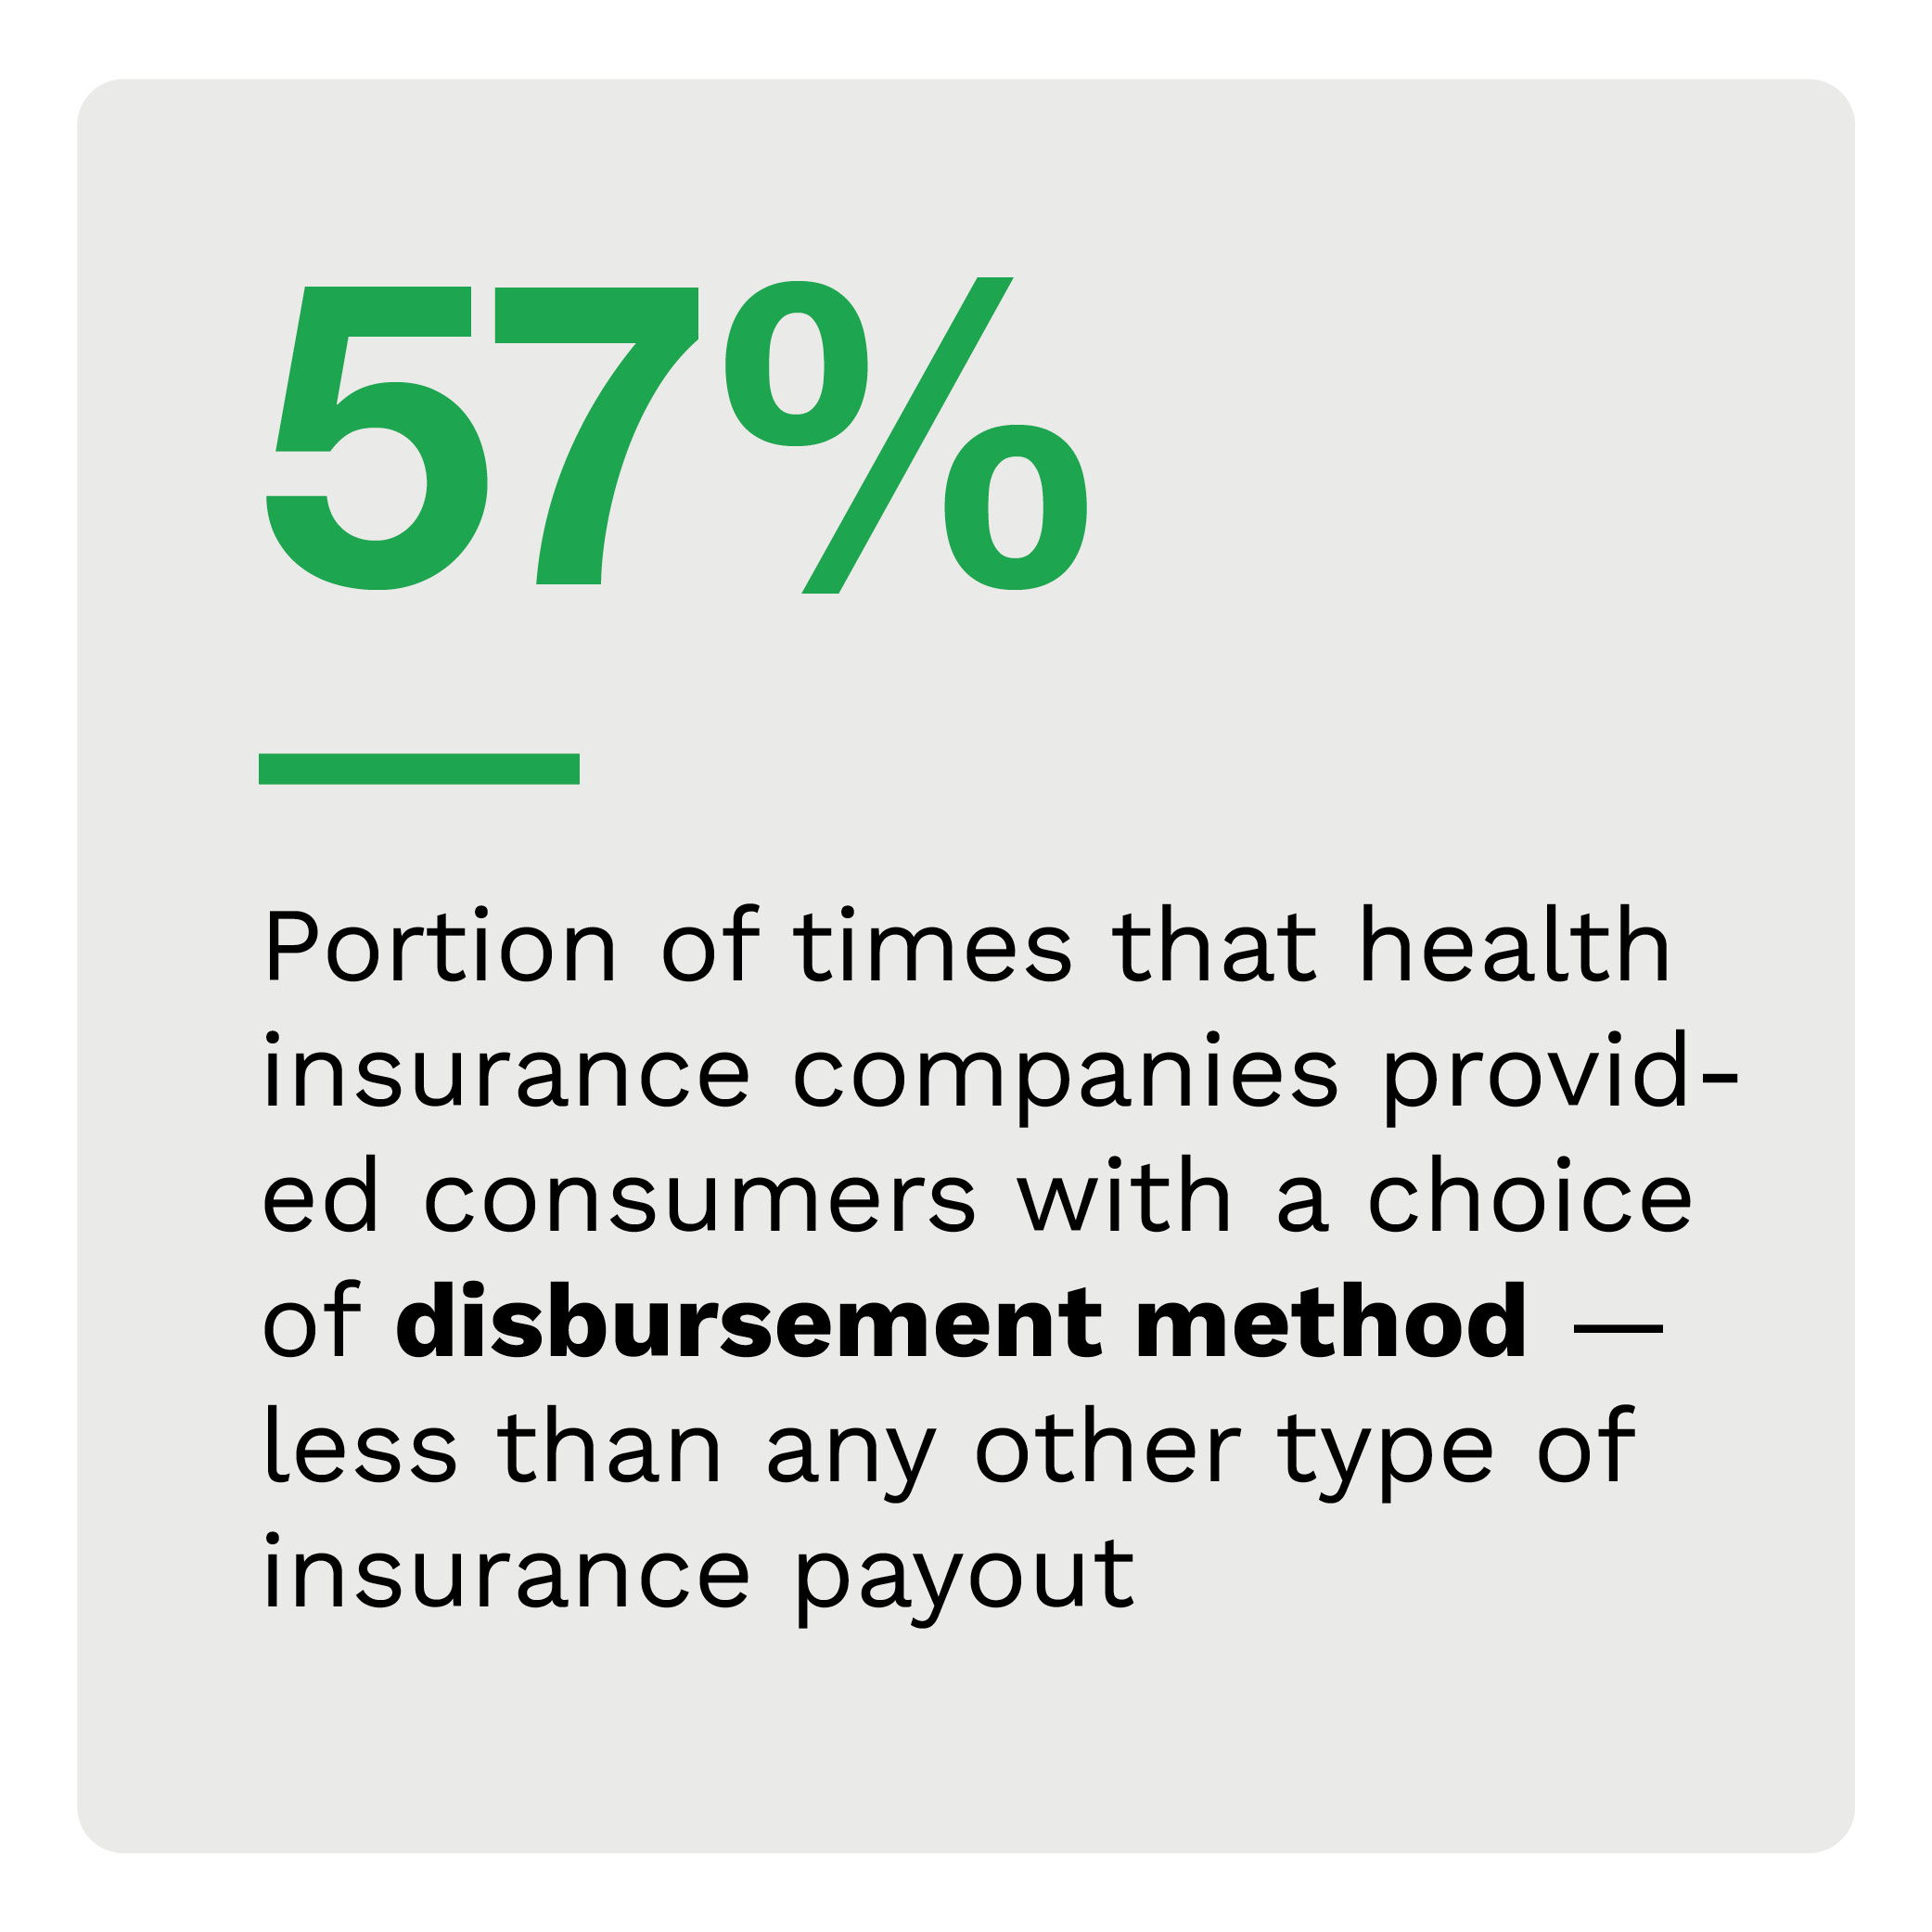 57%: Portion of times that health insurance companies provided consumers with a choice of disbursement method — less than any other type of insurance payout